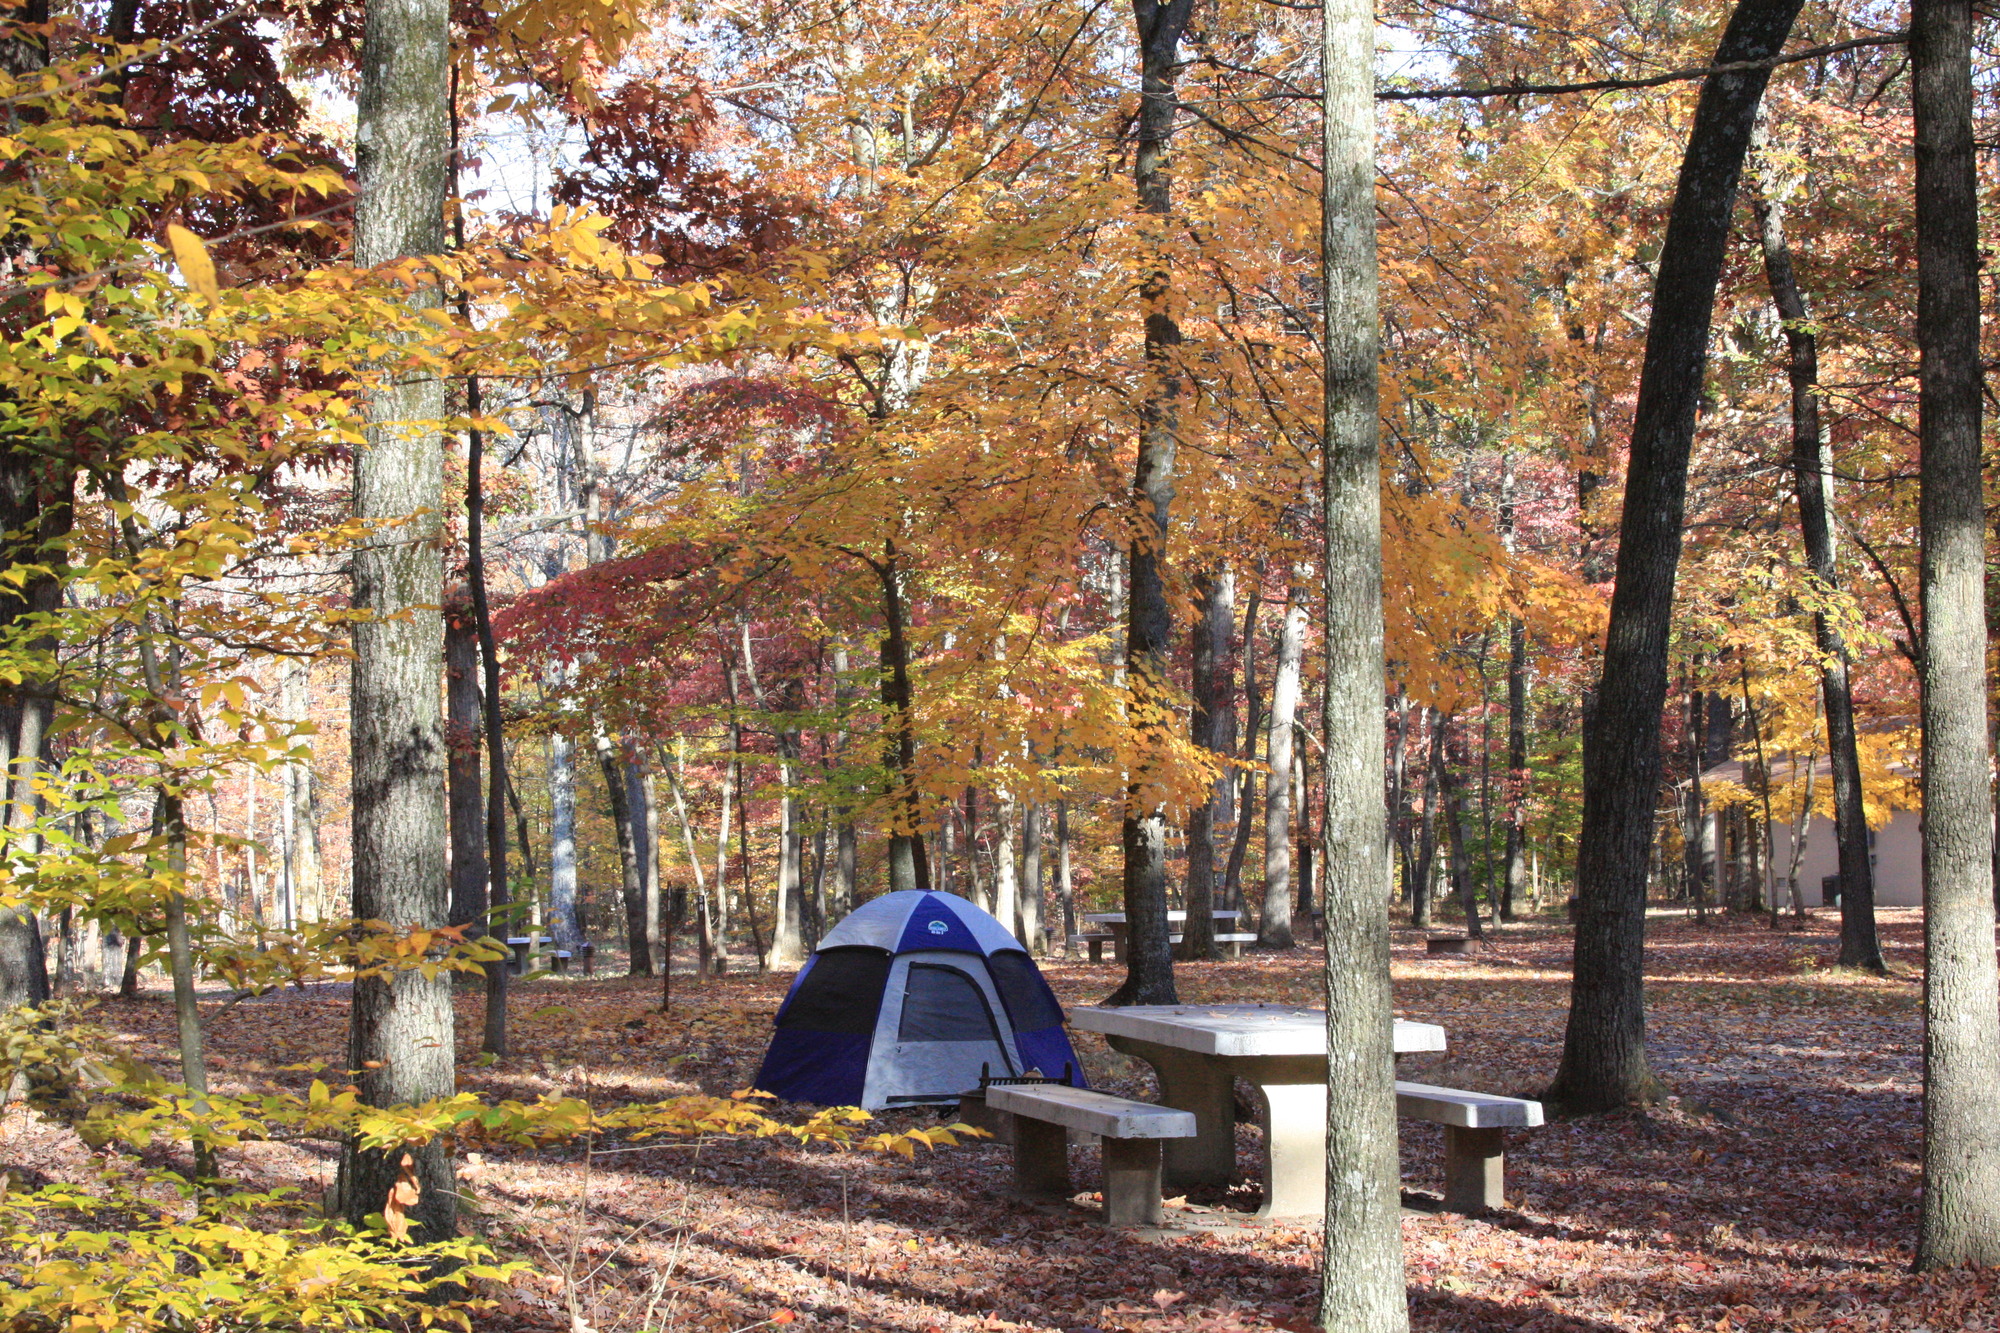 A small dome tent sits in a camnpground surroundd by yellow and red autumn foliage.